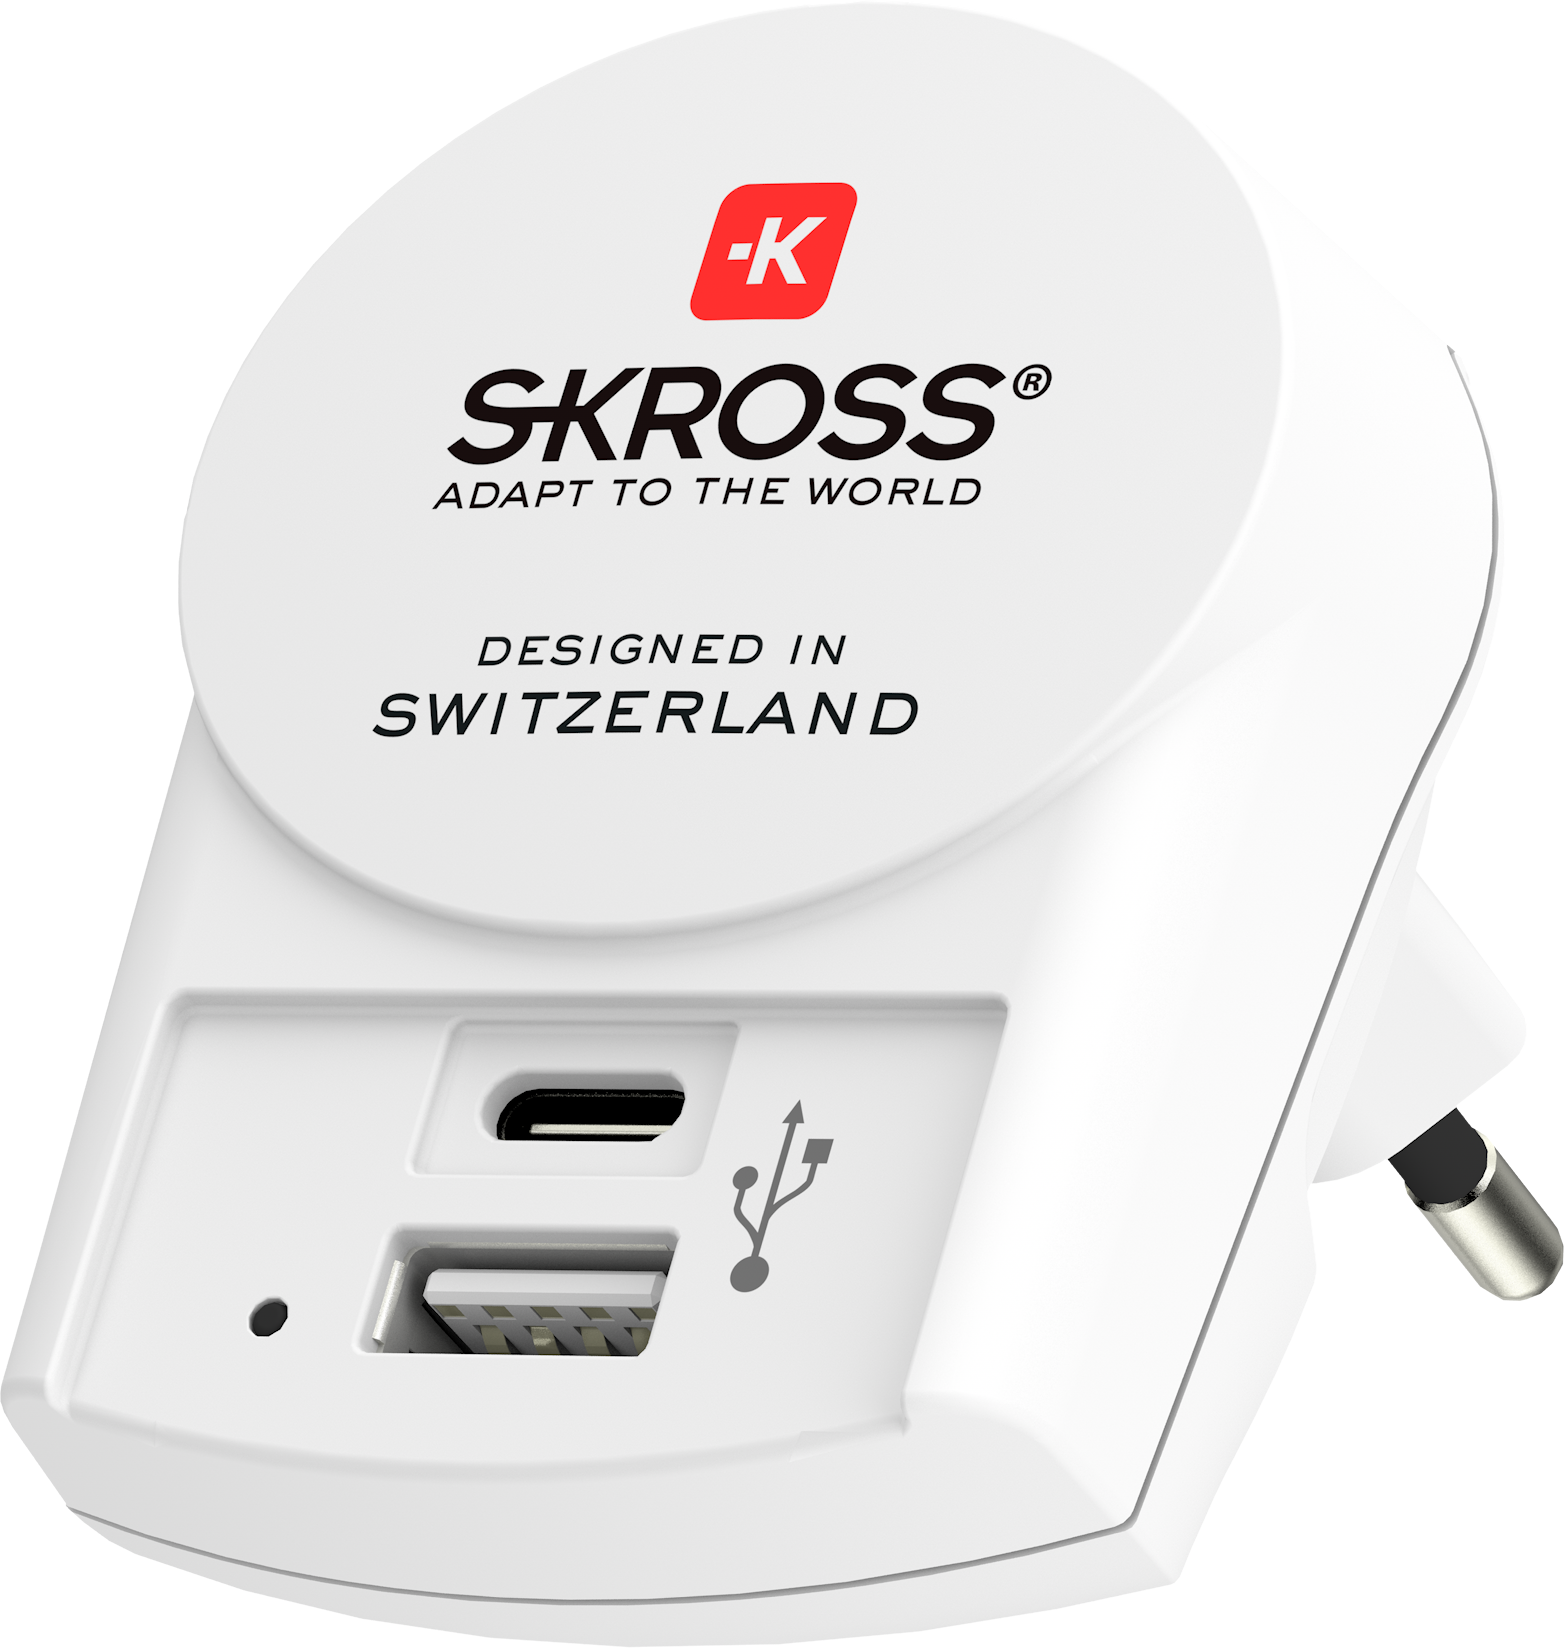 Skross USB Charger. Euro USB Charger (AC)